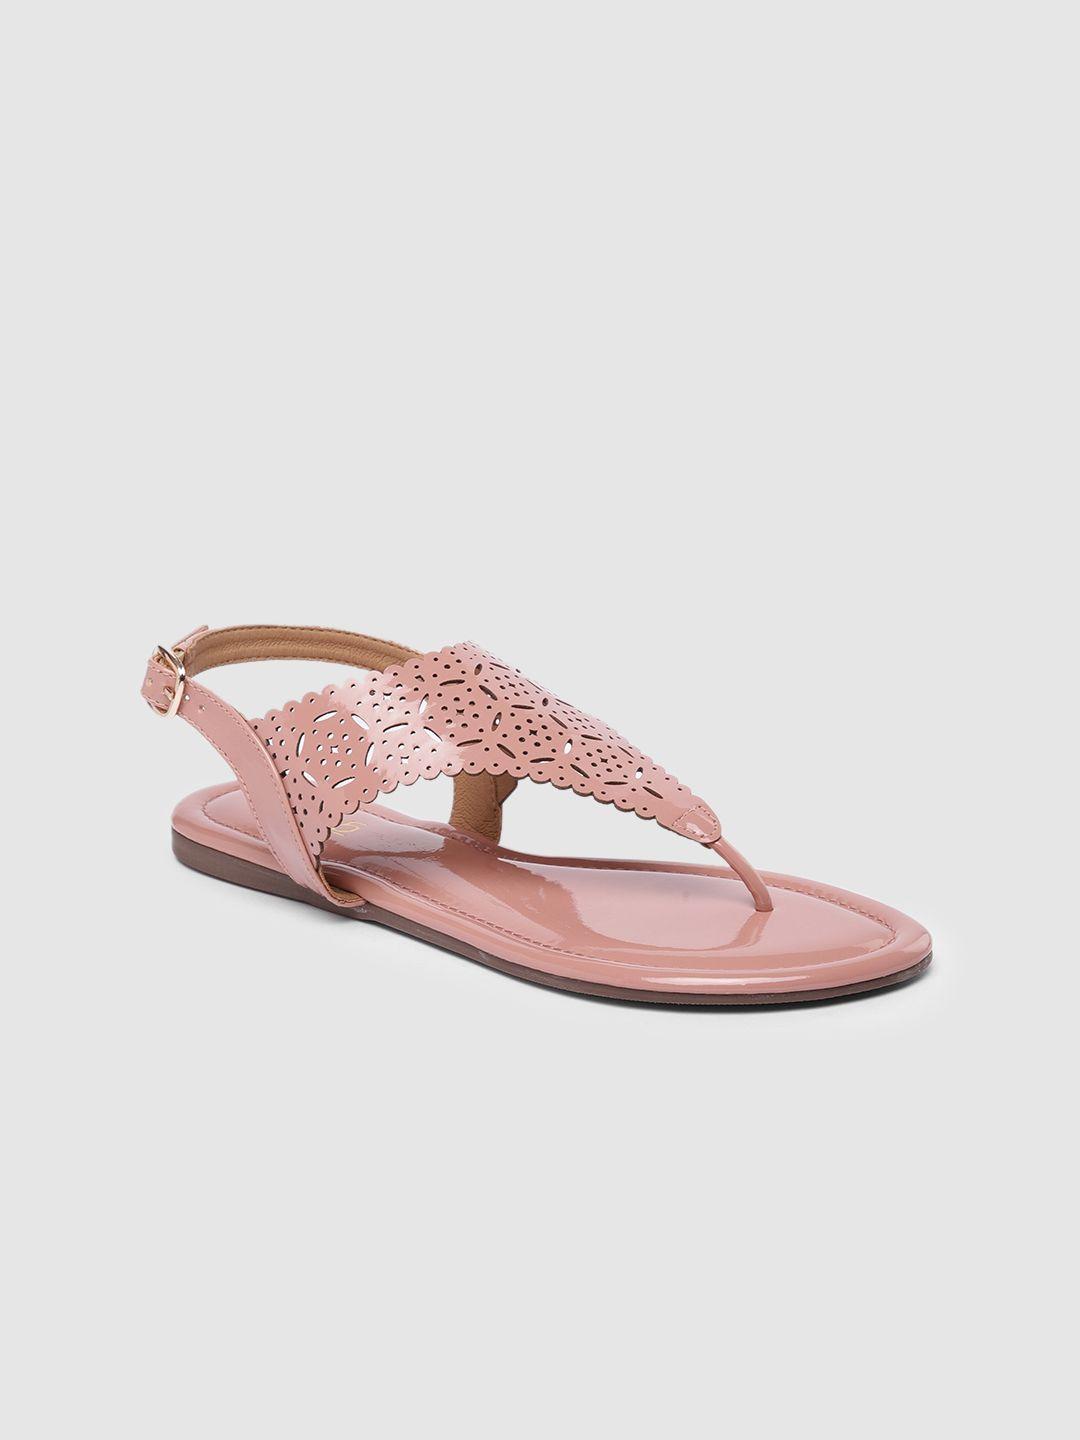 Inc 5 Women Peach-Coloured T-Strap Flats with Laser Cuts